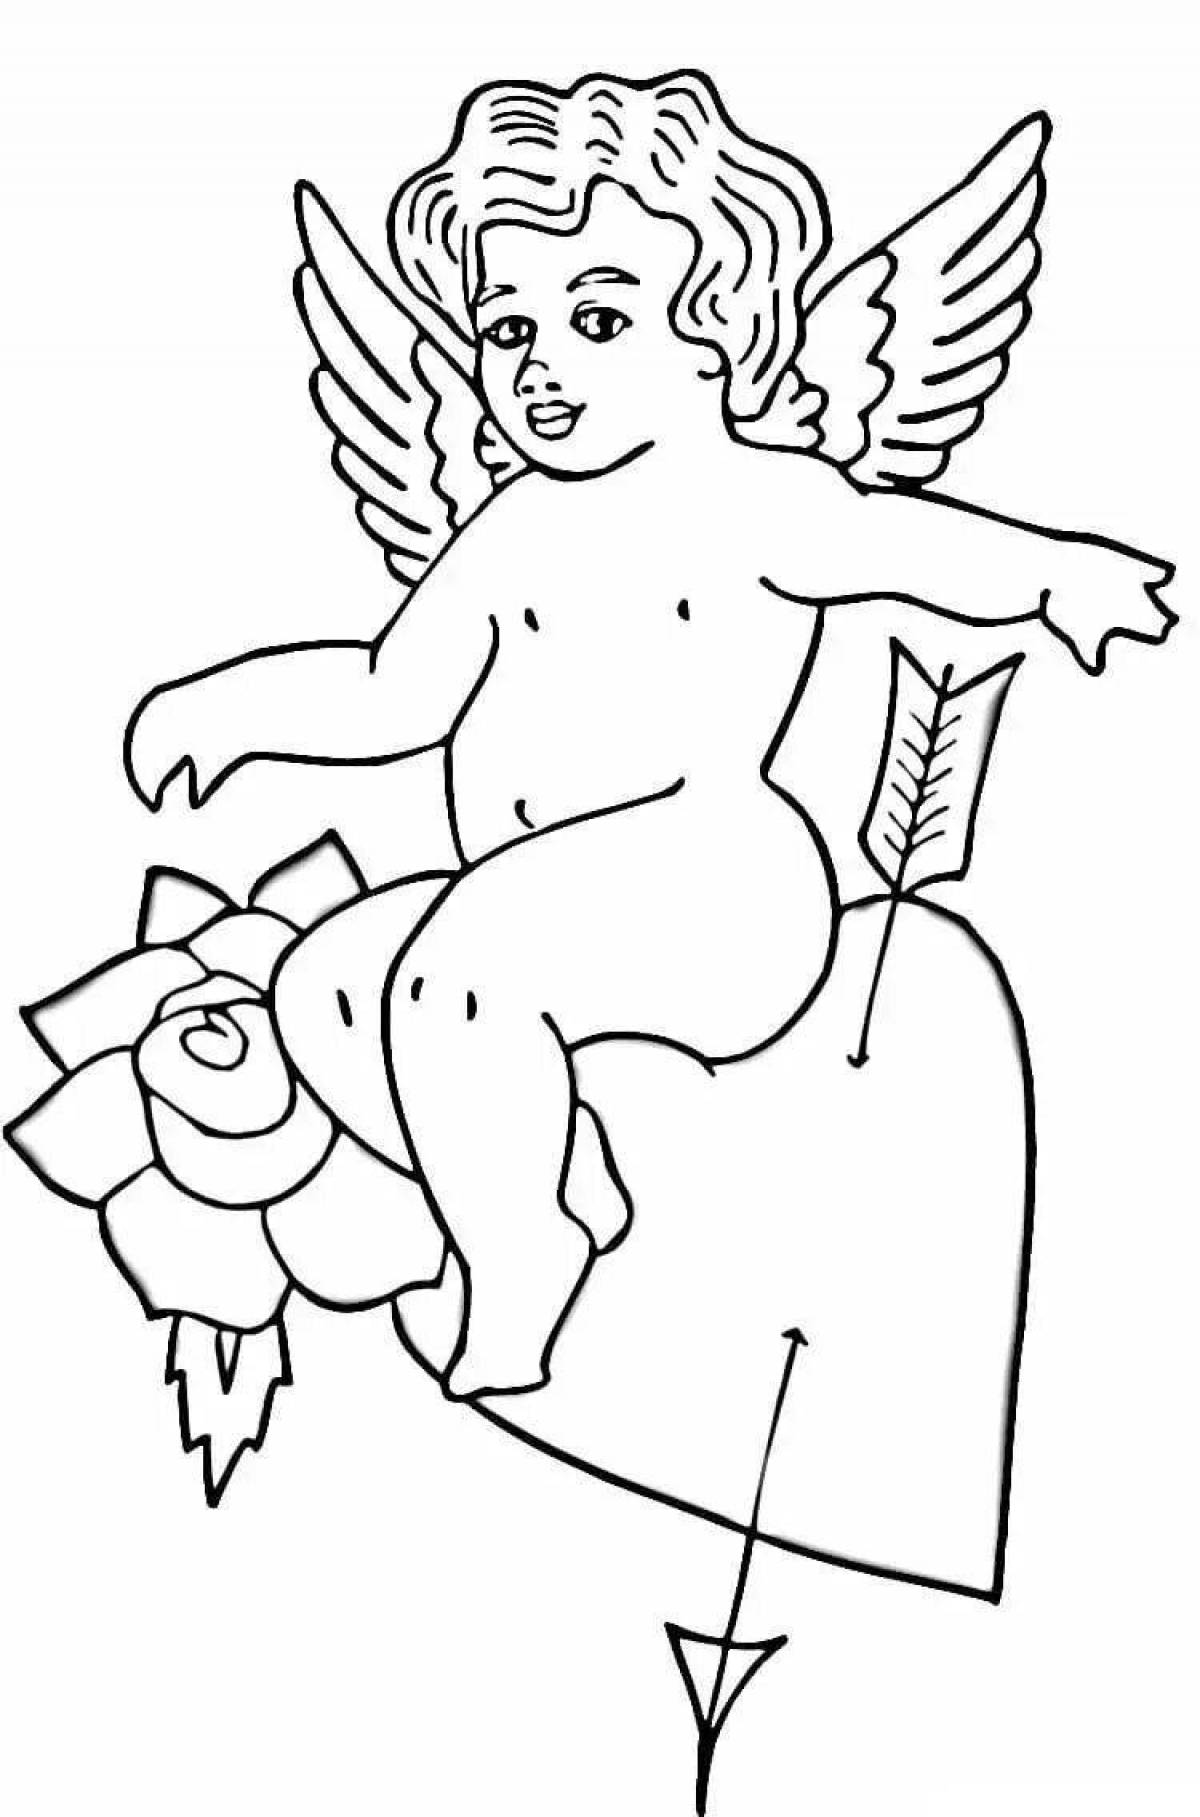 Coloring book brave Cupid